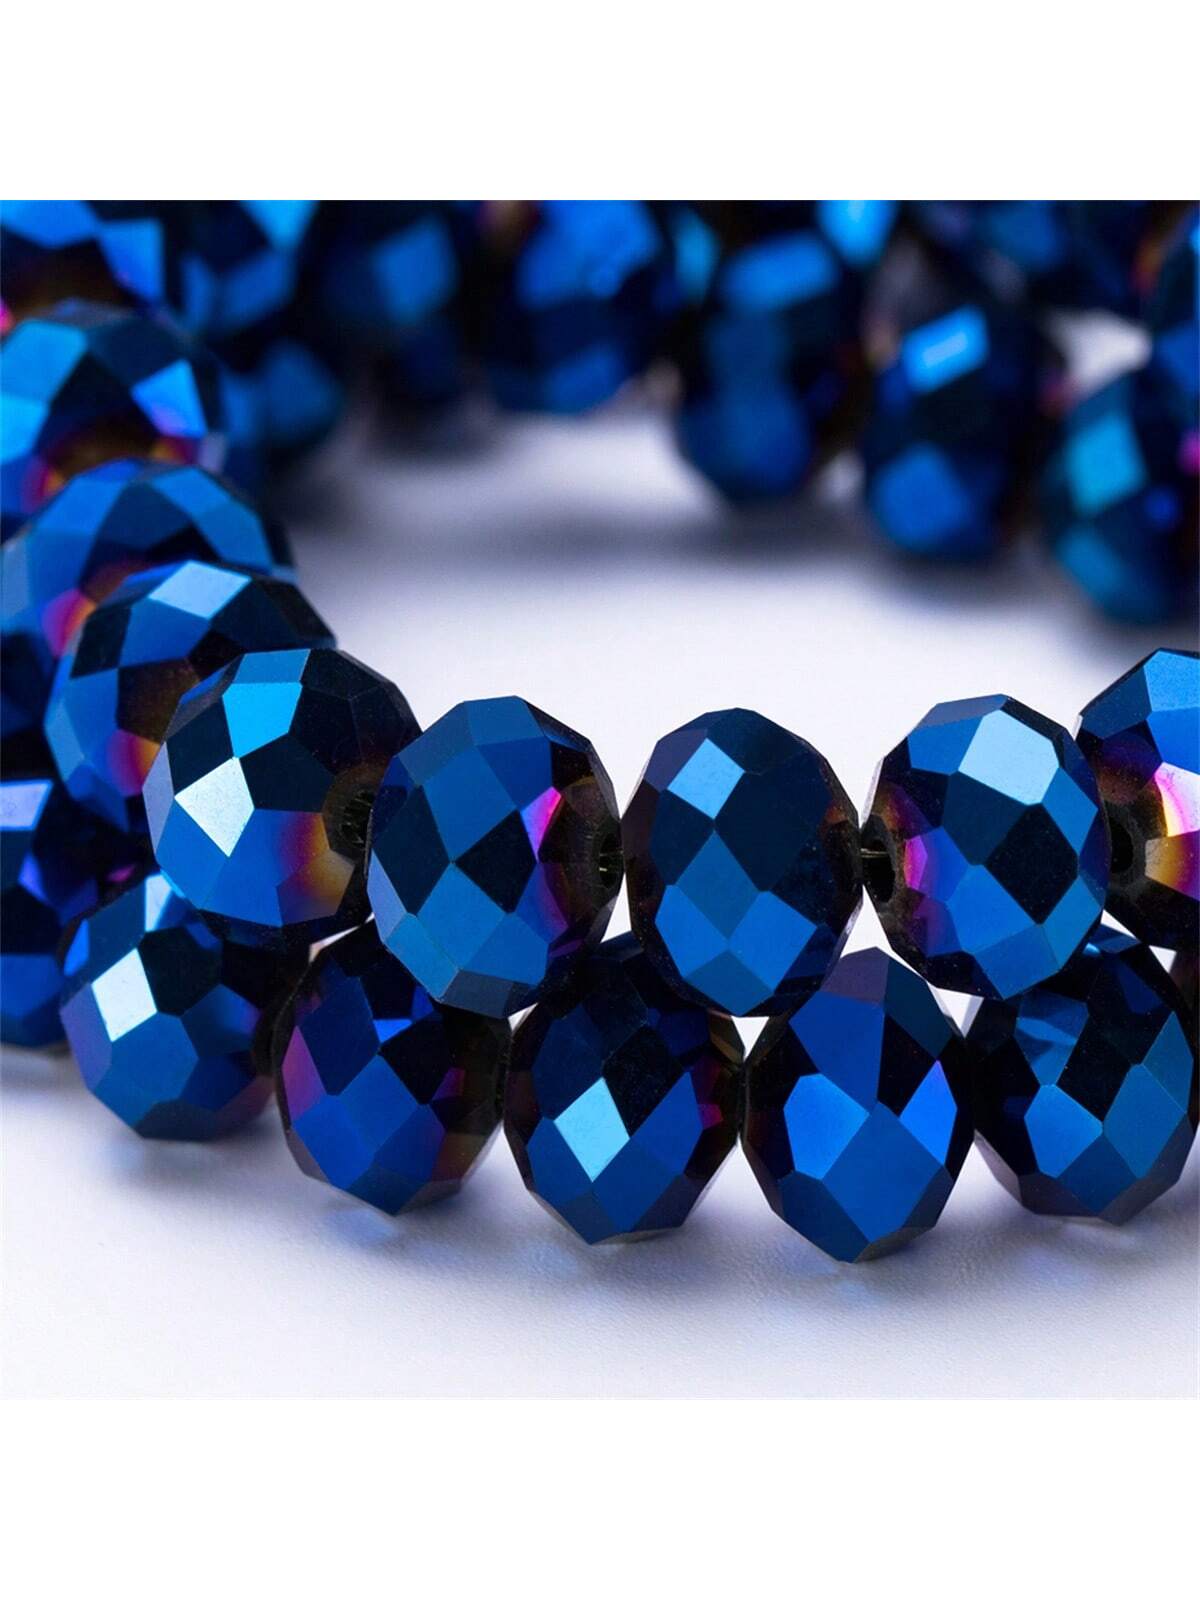 90pcs 6mm Crystal Glass Beads With Flat Floral Prints, Shiny Ab Finish, Loose Beads For Diy Bracelet, Earring & Necklace Making Craft Decoration (blue, 4x6mm)